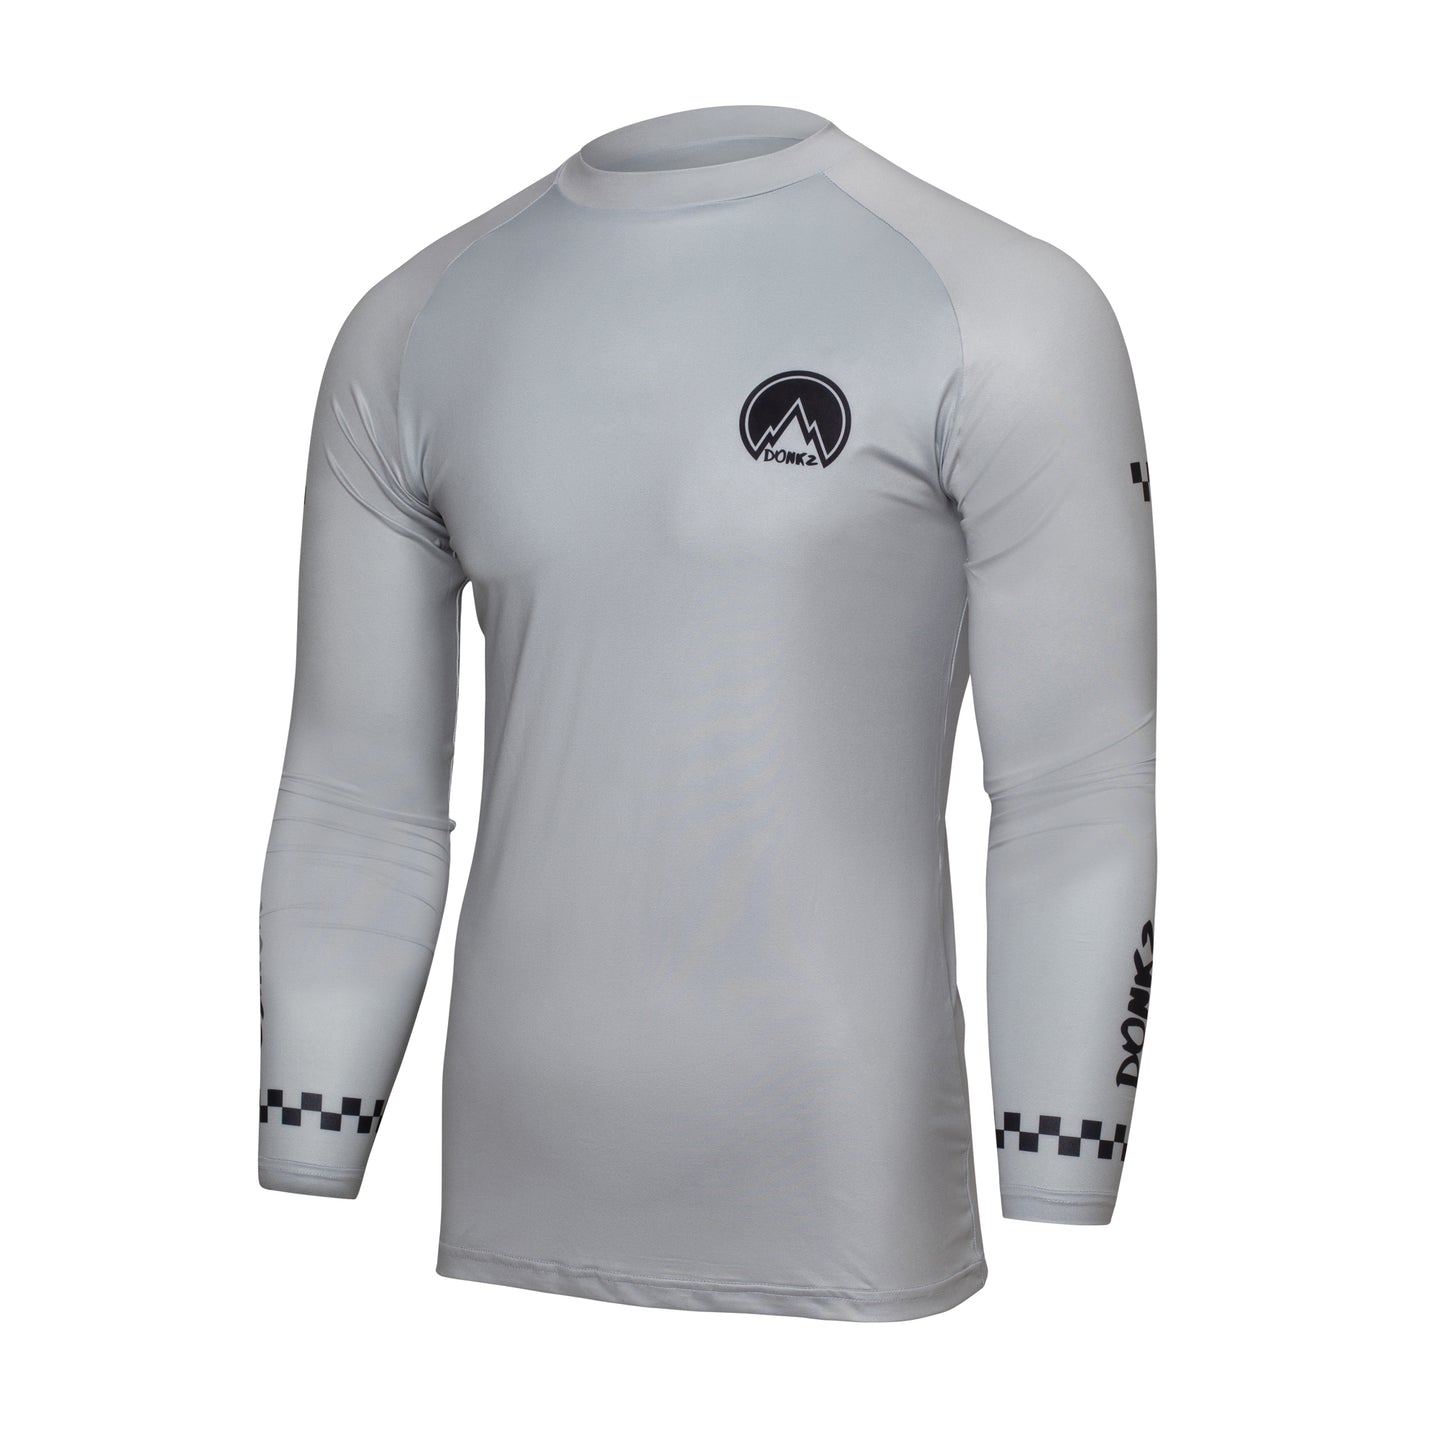 Youth Grayscale Compression Top